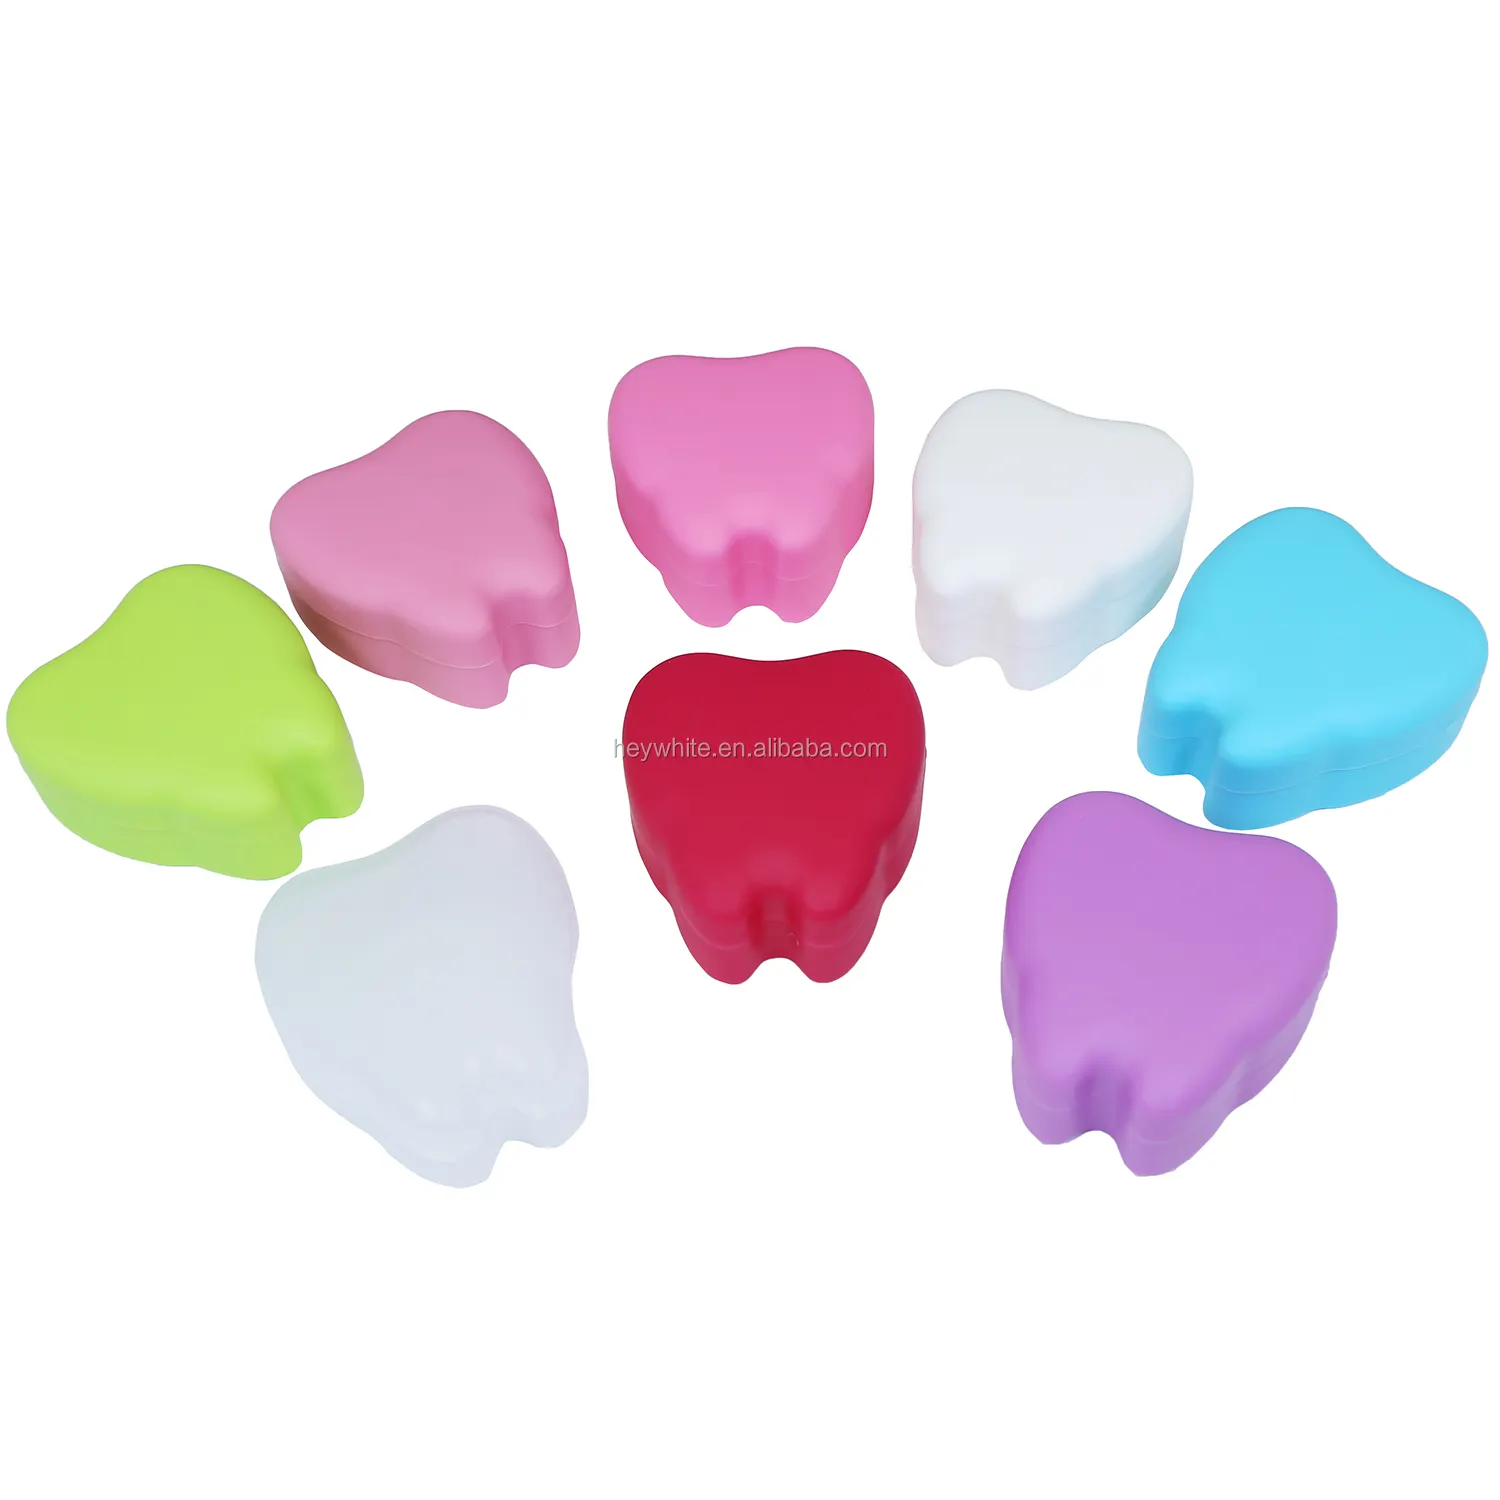 Japan hot sell teeth whitening mouth tray plastic box case